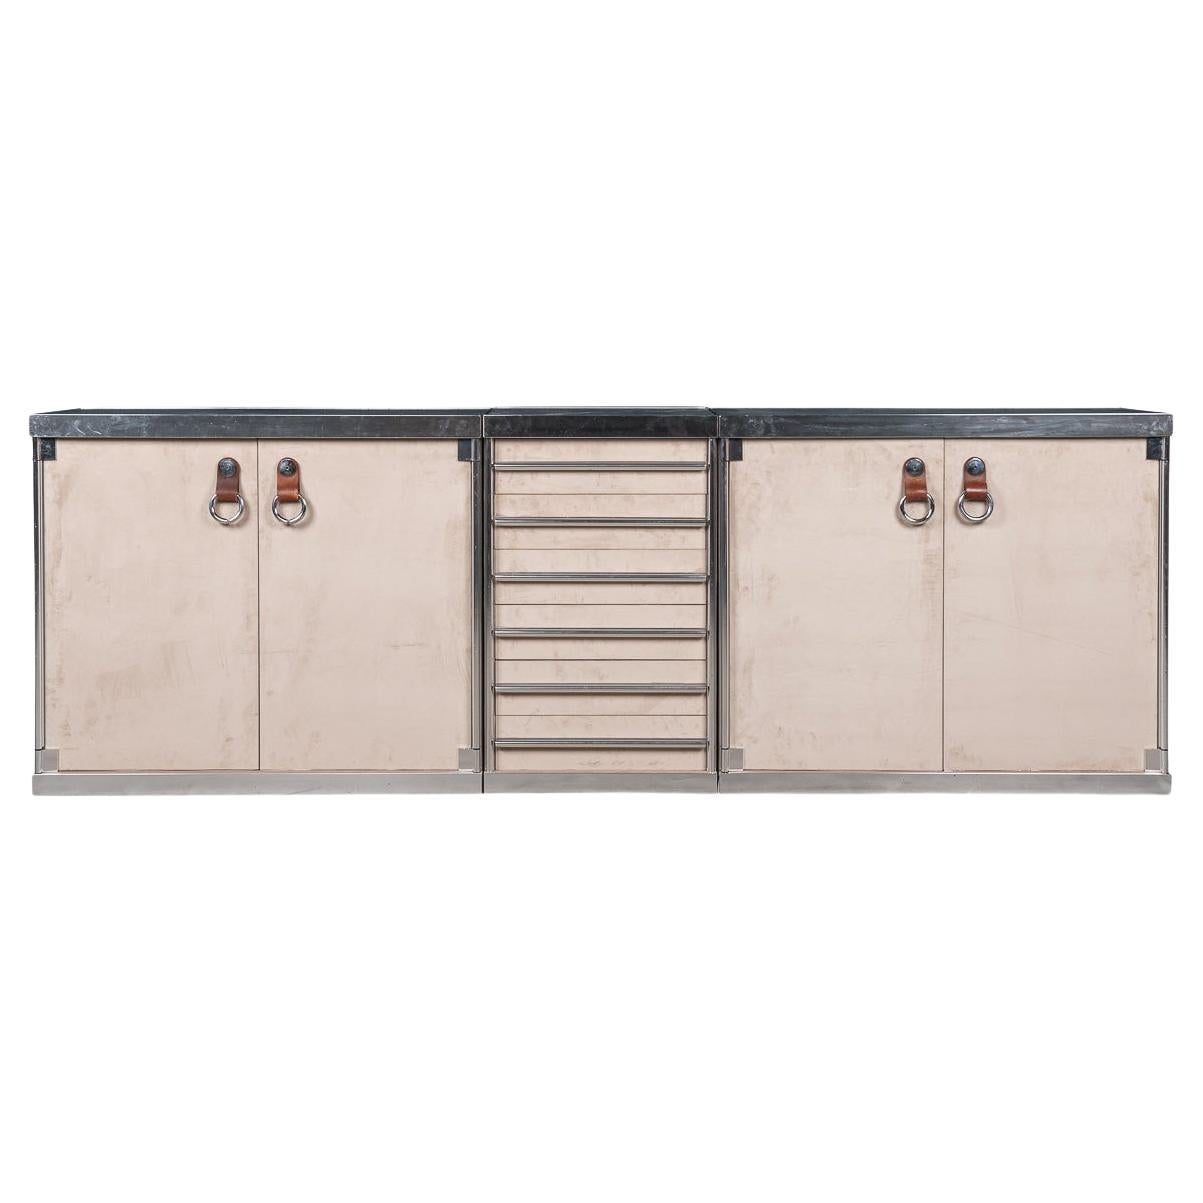 20th Century French Three Piece Sideboard By Guido Faleschini For Hermes, c.1970